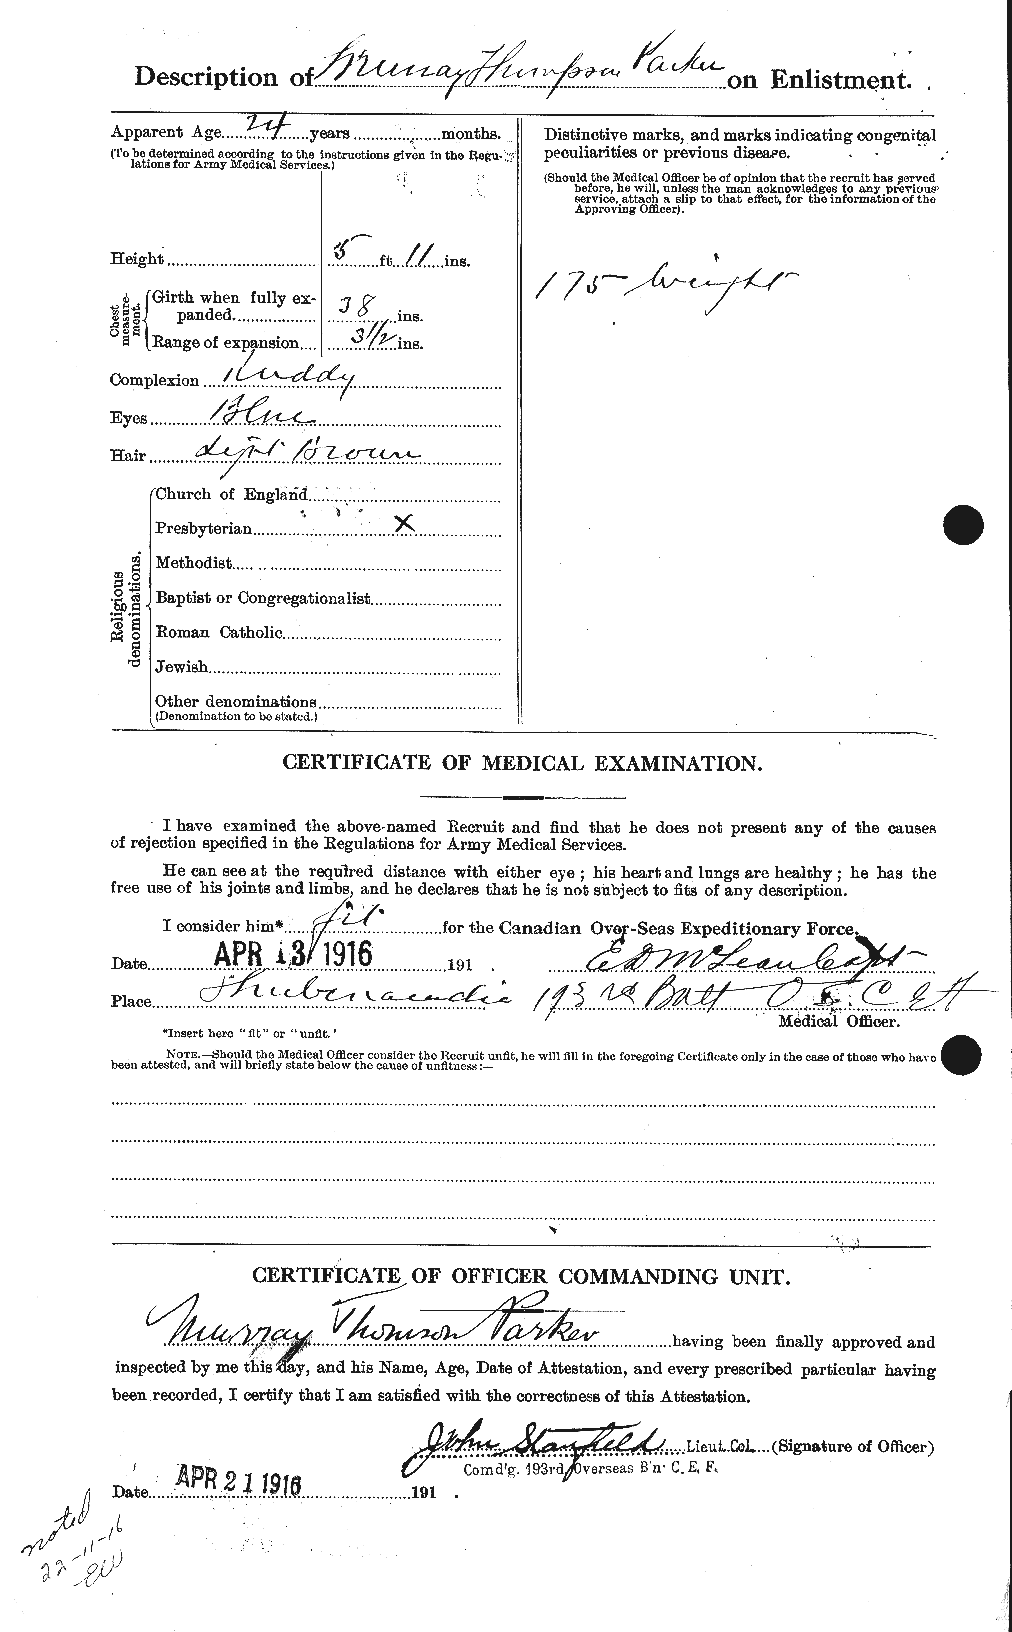 Personnel Records of the First World War - CEF 565674b